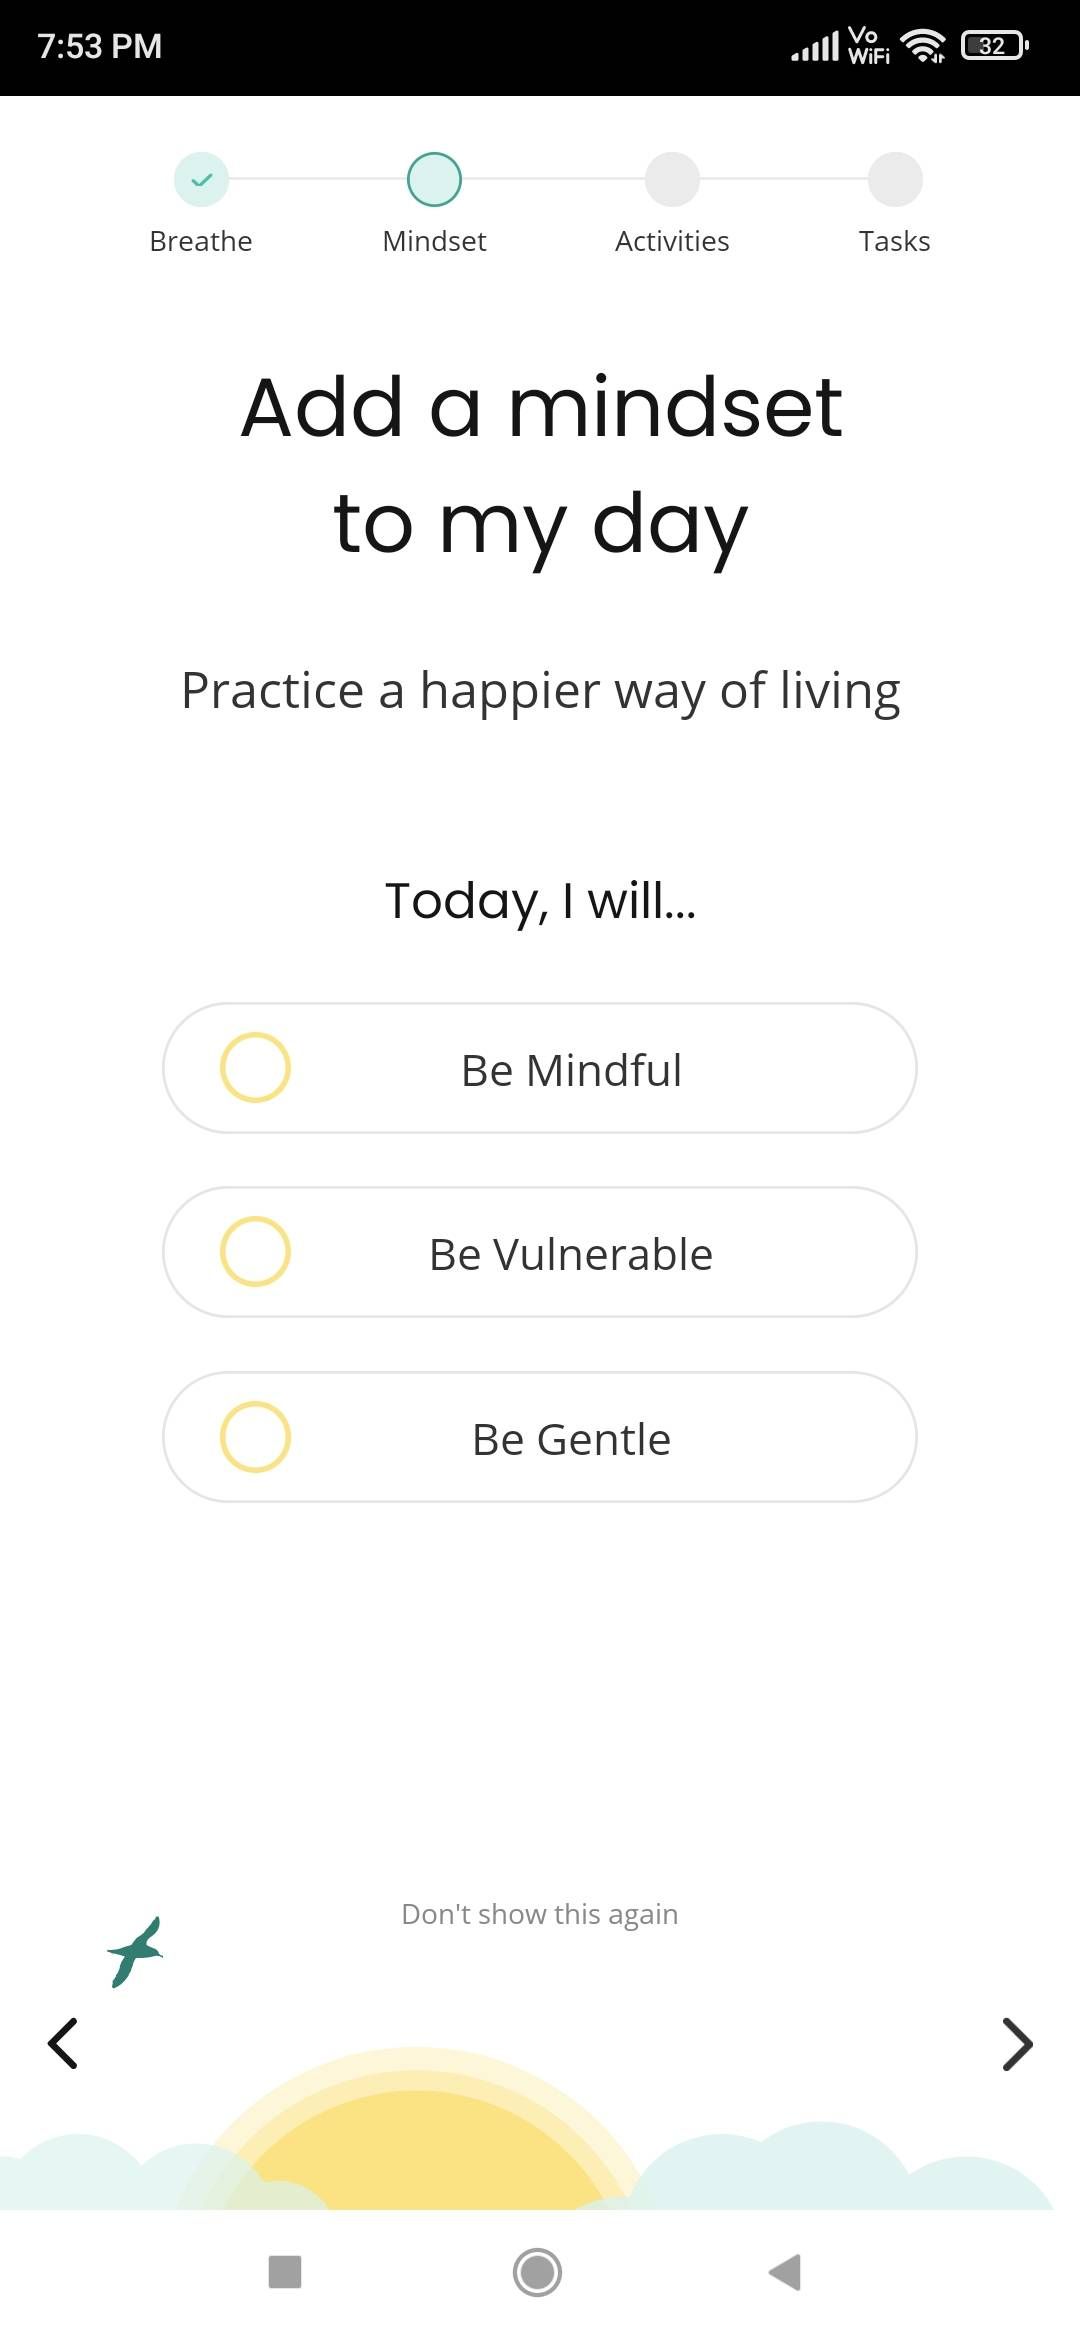 Todayist puts self-care at the forefront by setting a daily mindset to tackle your agenda